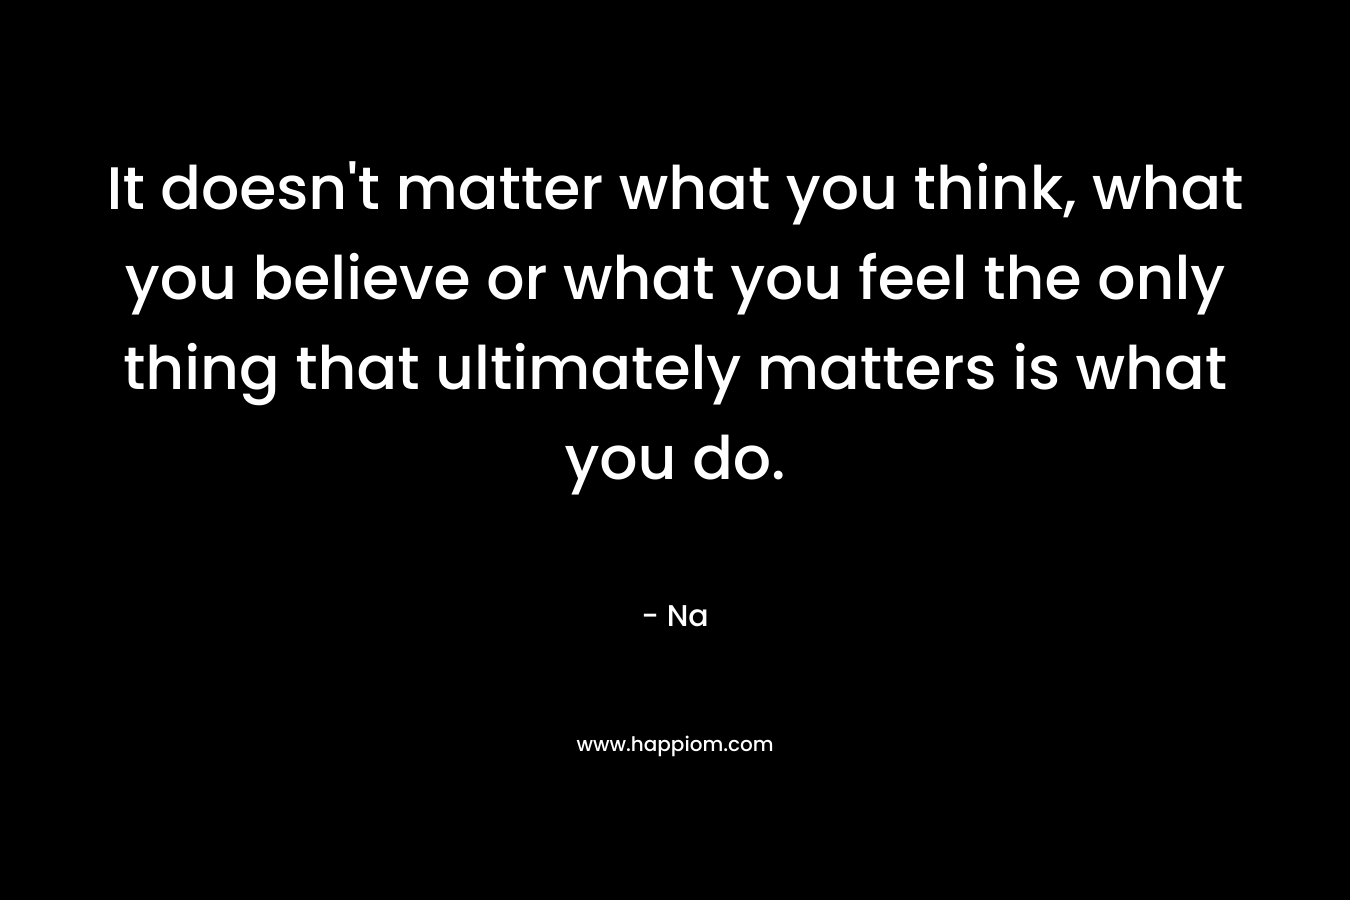 It doesn't matter what you think, what you believe or what you feel the only thing that ultimately matters is what you do.